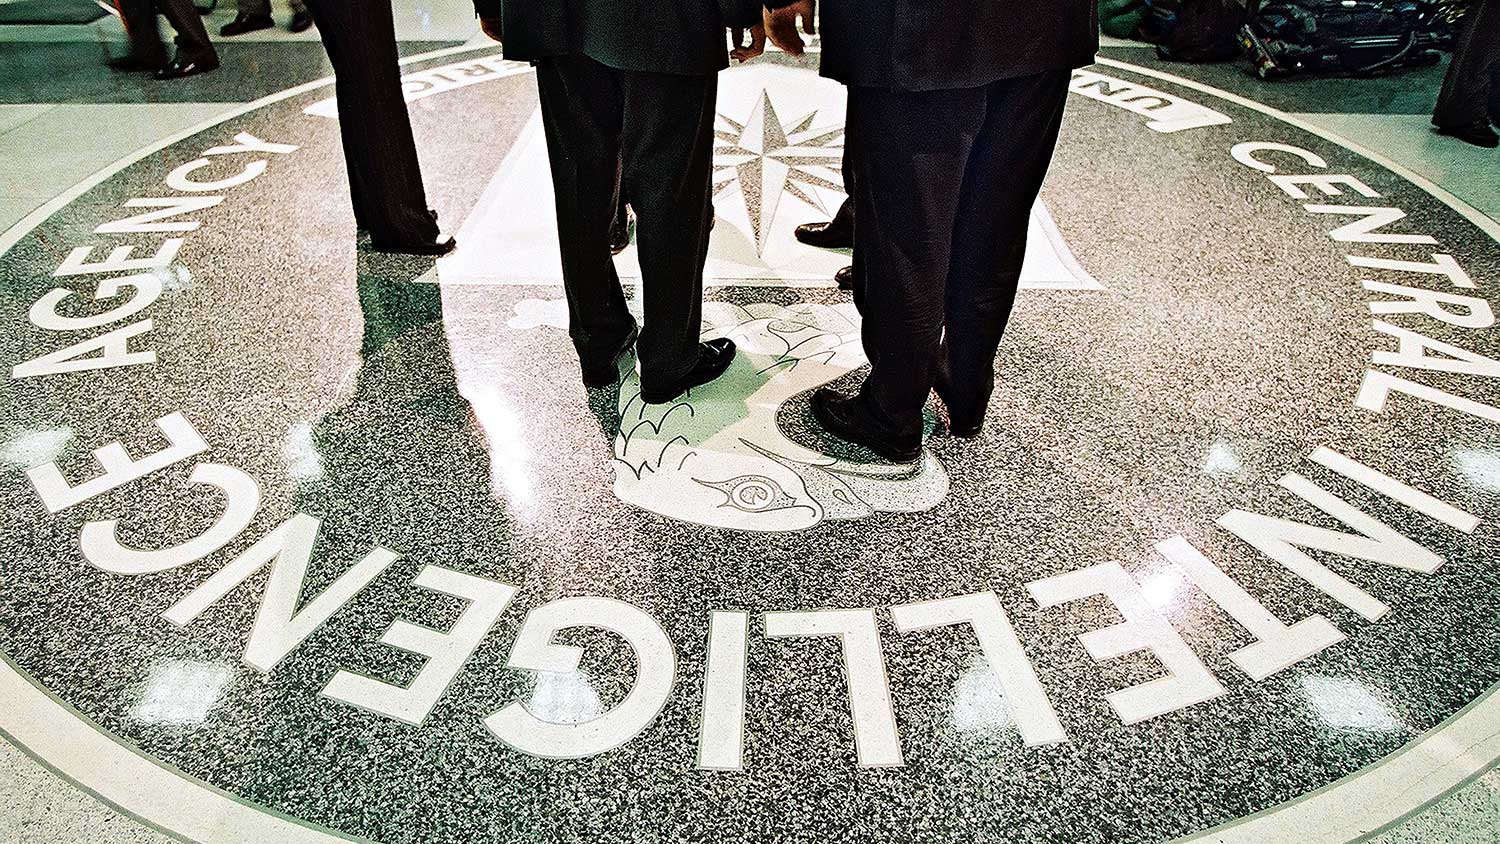 President George W. Bush, Central Intelligence Agency Director George Tenet and others stand on the seal of the Agency March 20, 2001 at the CIA Headquarters in Langley, Virginia.
